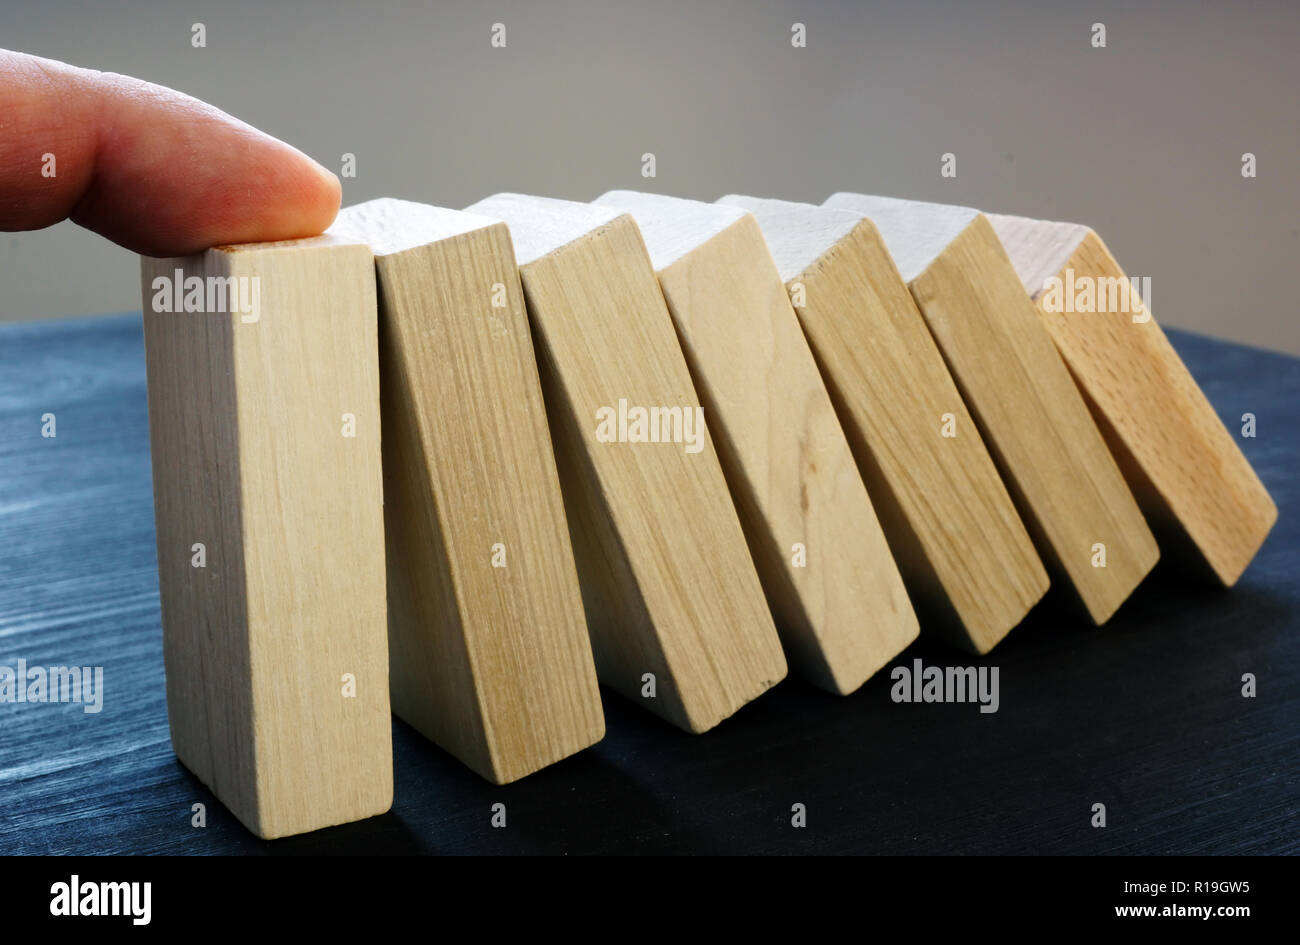 Hand support falling blocks with domino effect. Problem solving skills. Stock Photo